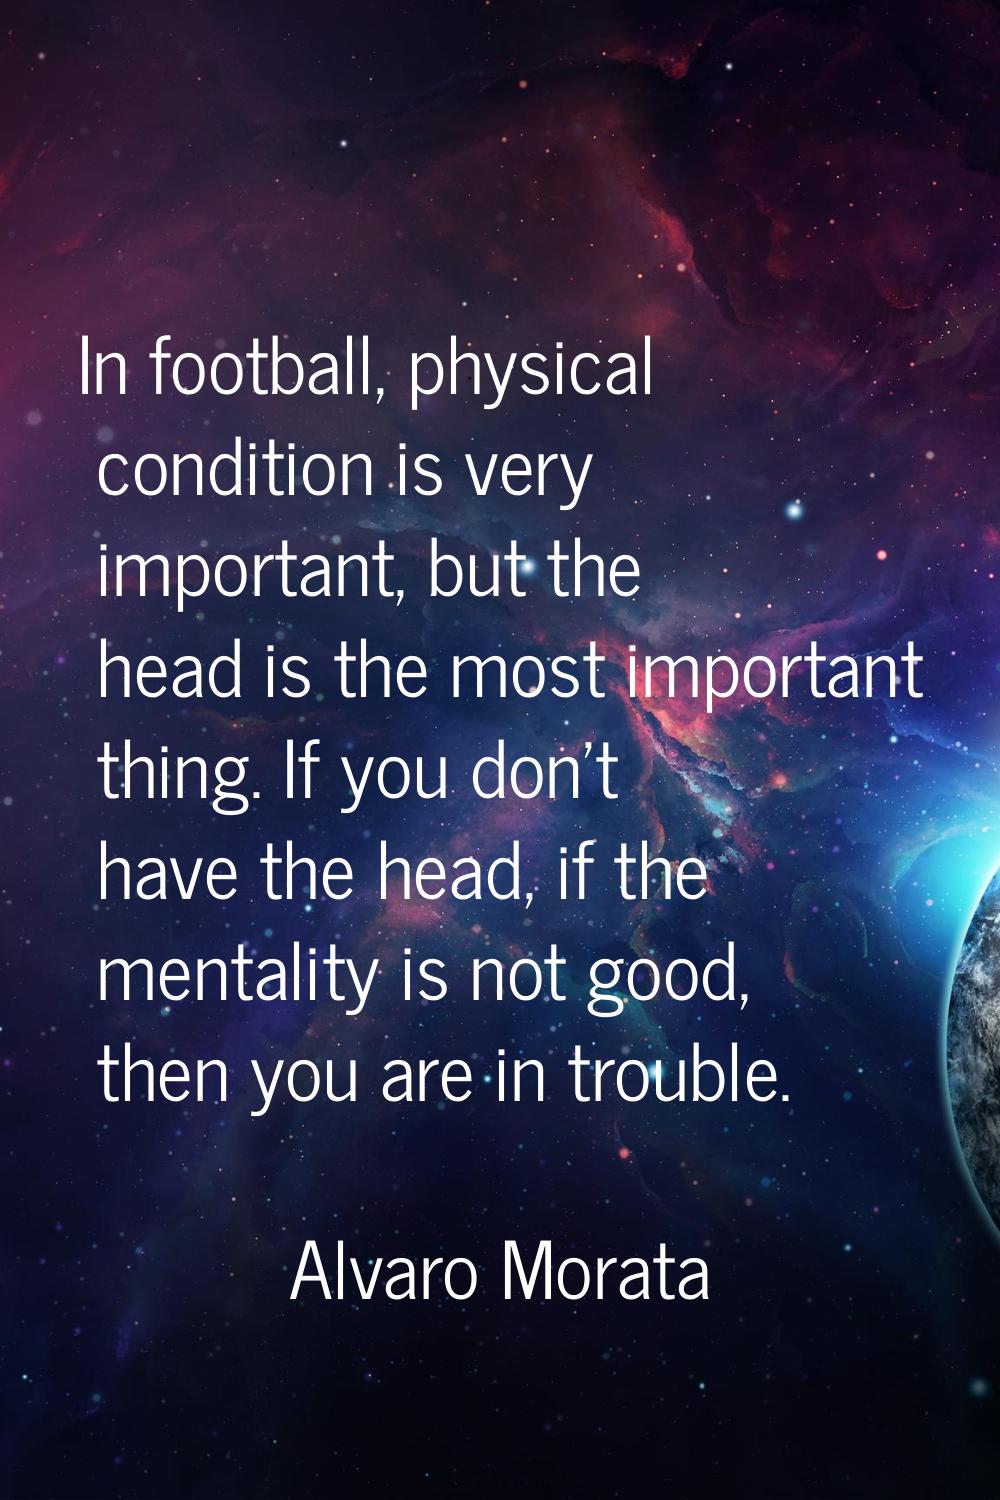 In football, physical condition is very important, but the head is the most important thing. If you